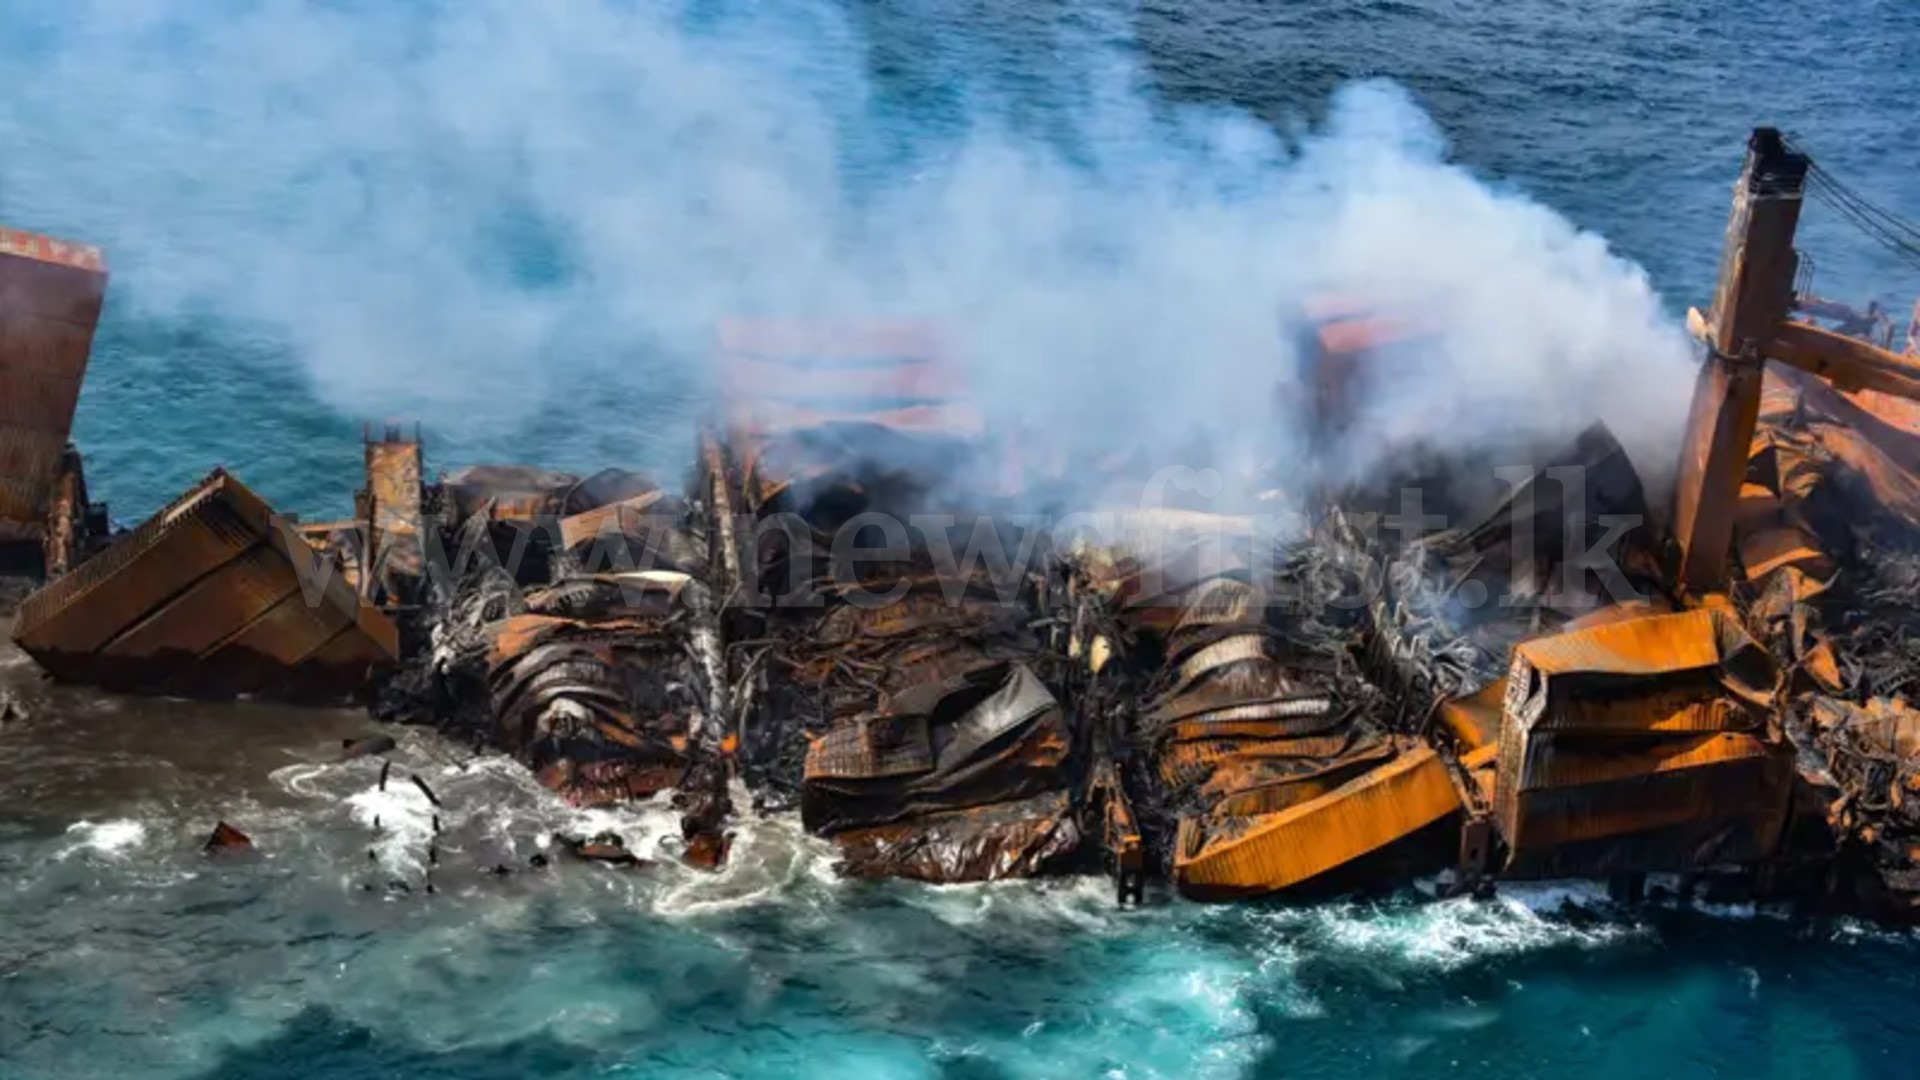 CEO of vessel operator apologizes for impact of sunken container ship